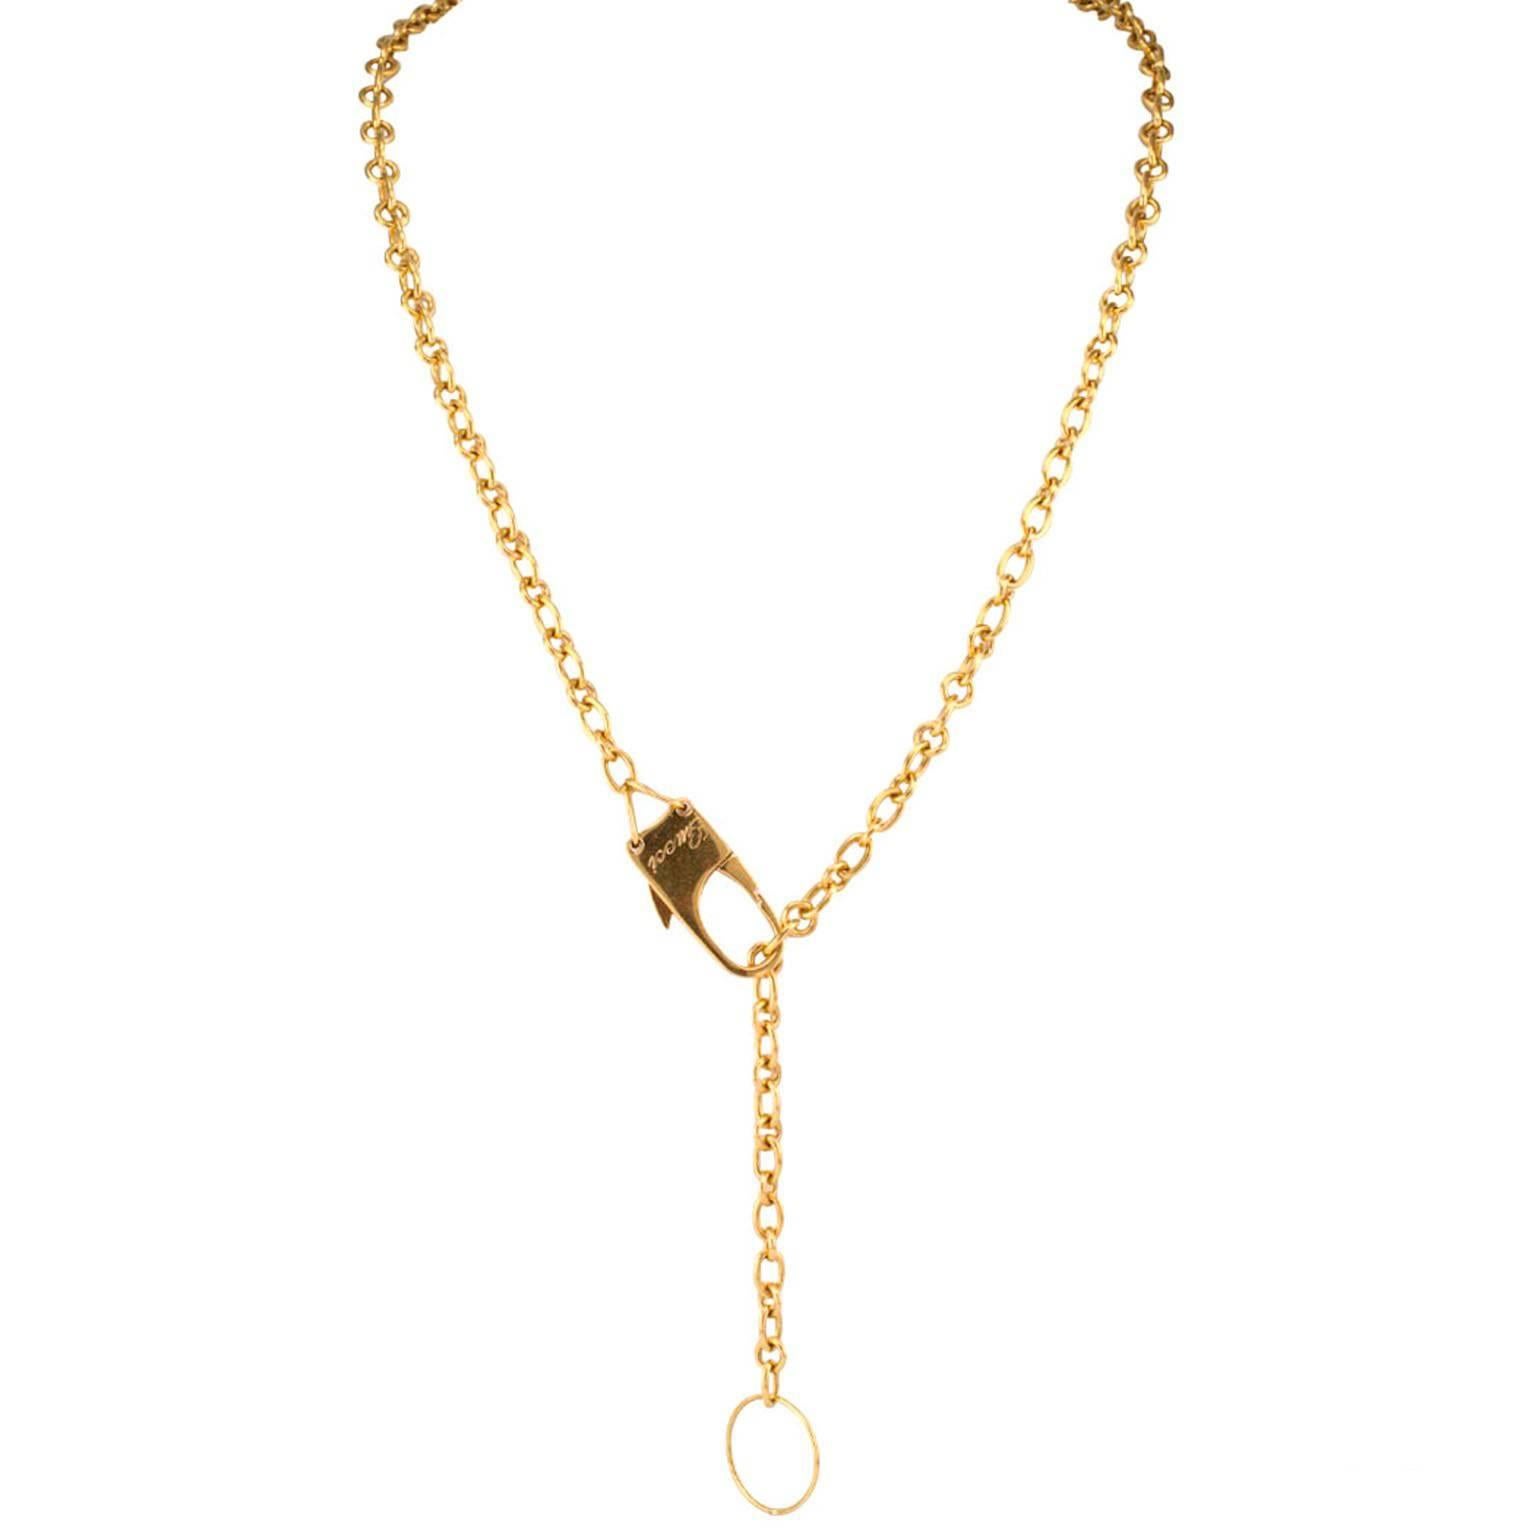 1970s Gucci Long Chain Necklace